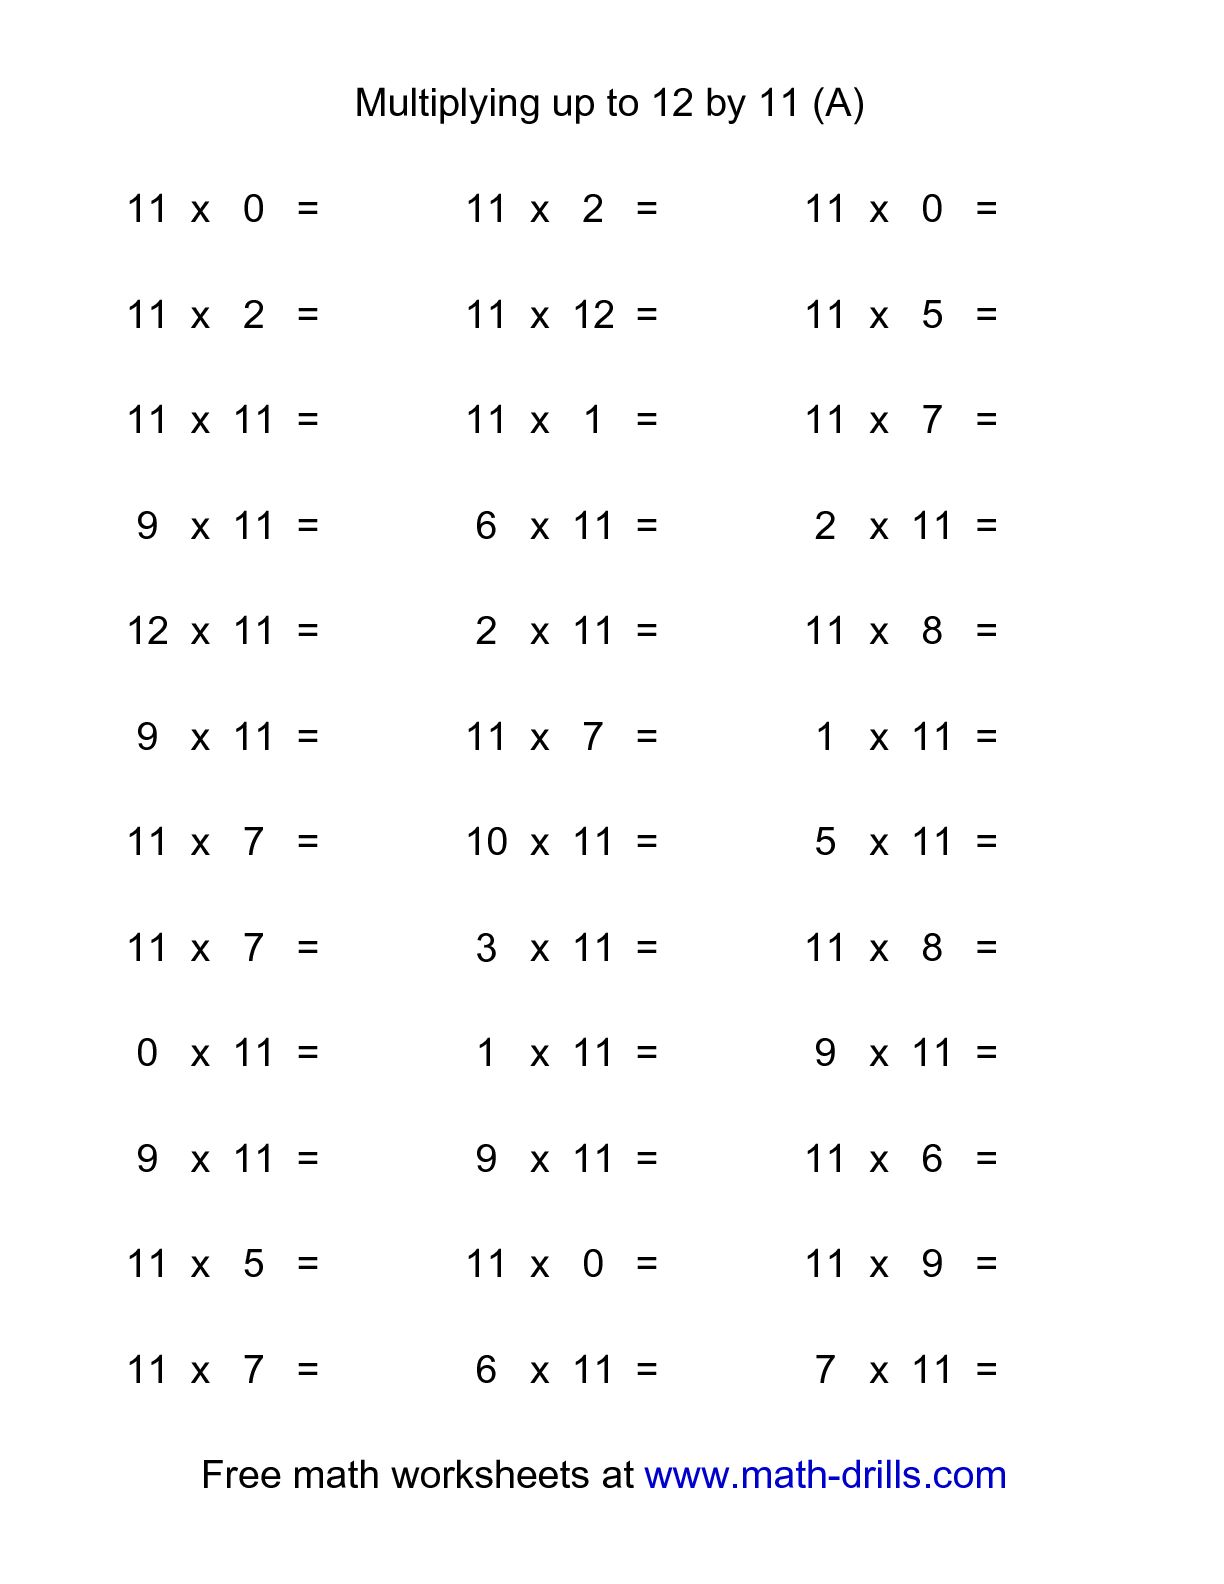 14-best-images-of-11-and-12-multiplication-worksheets-multiplication-worksheets-1-12-10-11-12